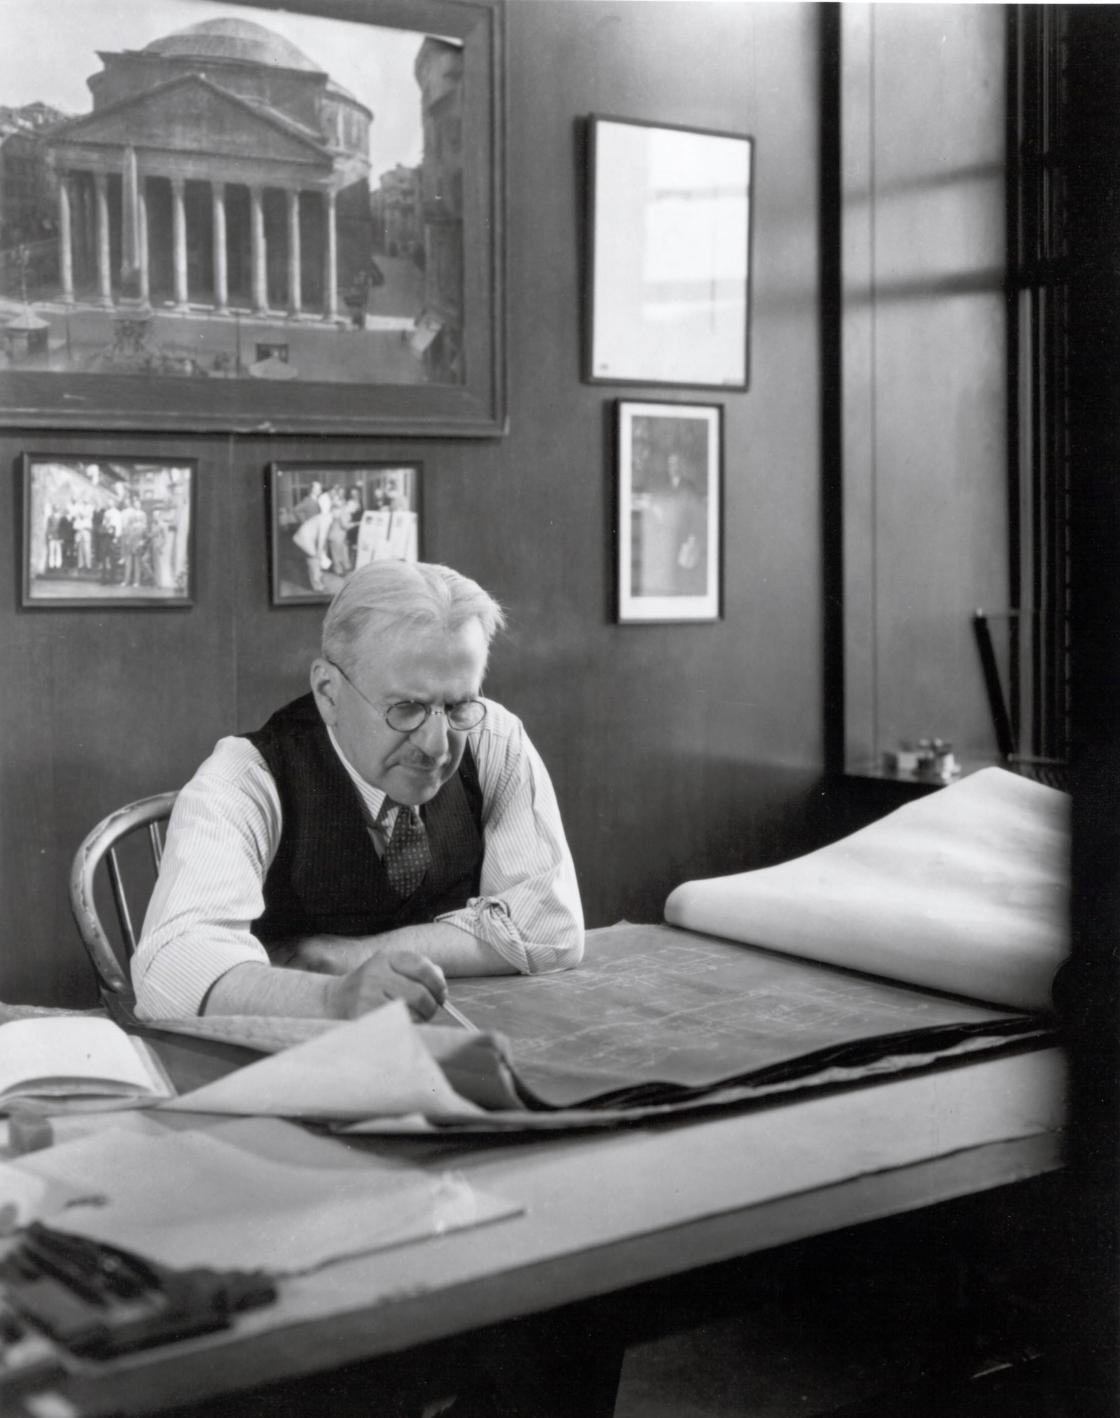 Photograph of Albert Kahn at his desk with an image of the Pantheon behind him